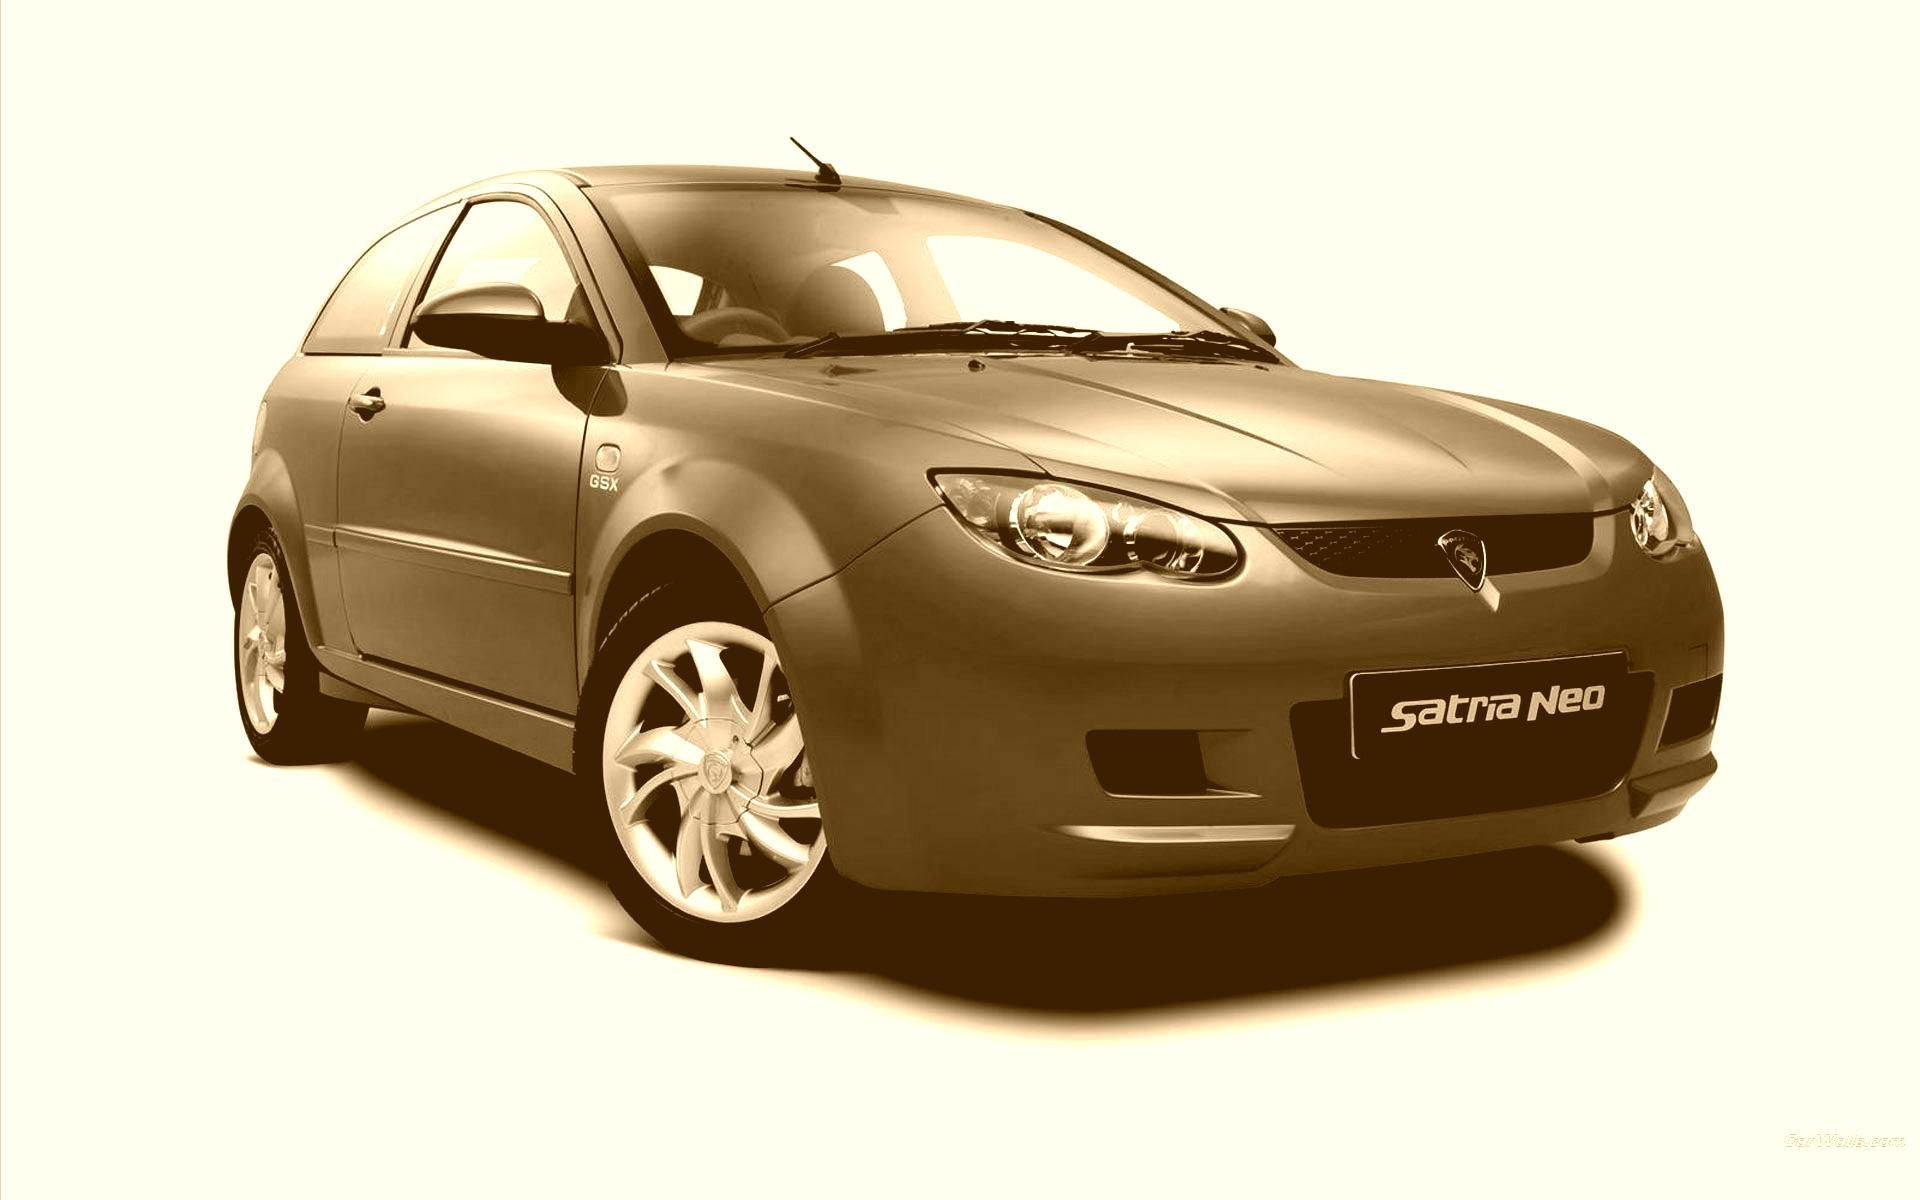 Proton Satria Neo, production to cease this year